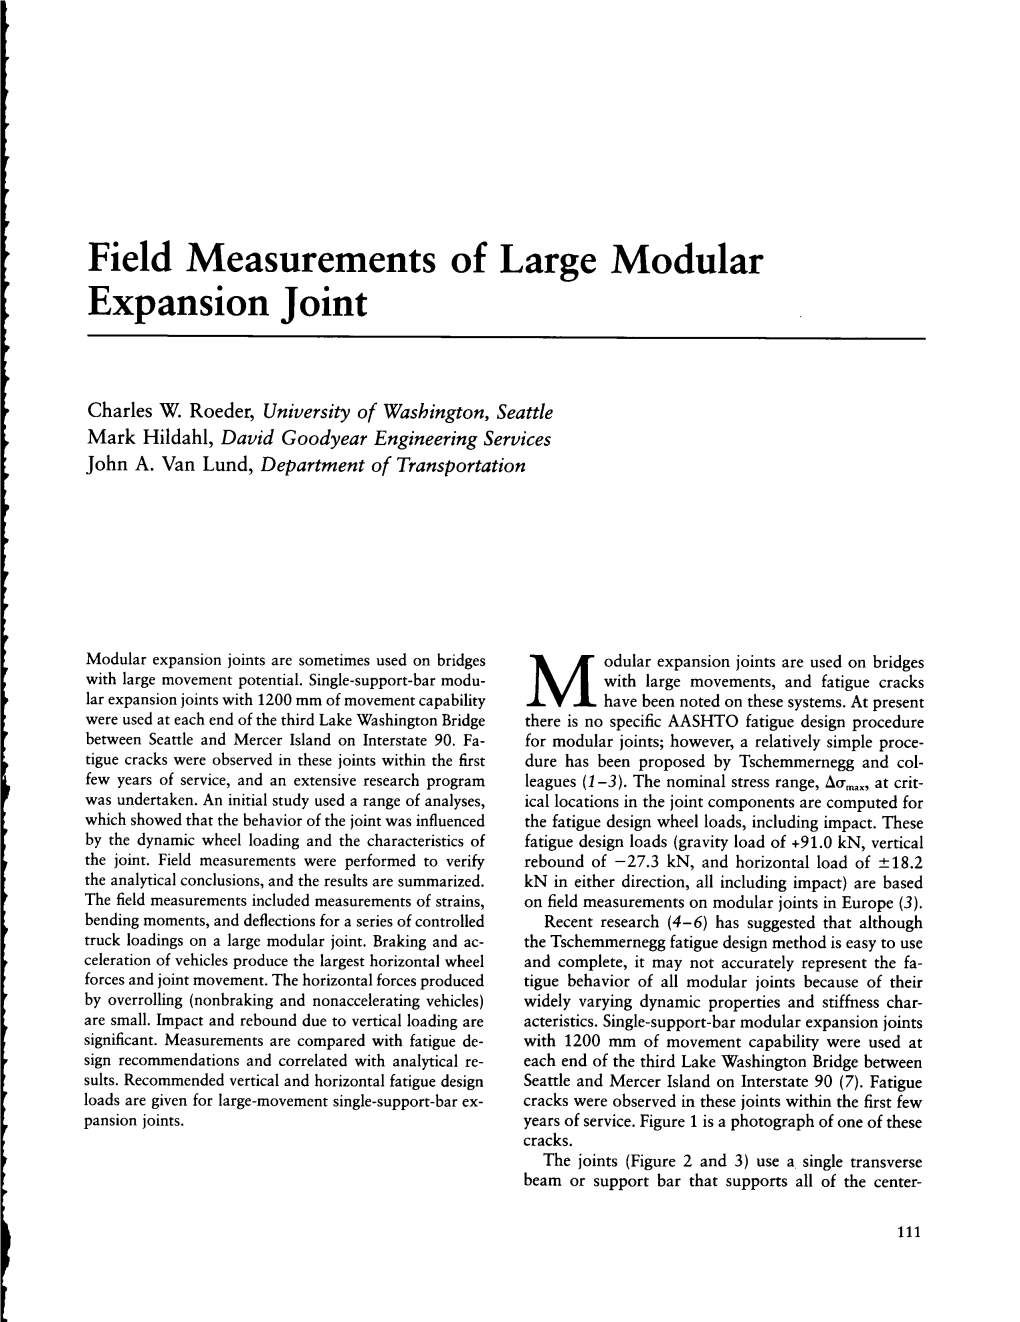 Field Measurements of Large Modular Expansion Joint